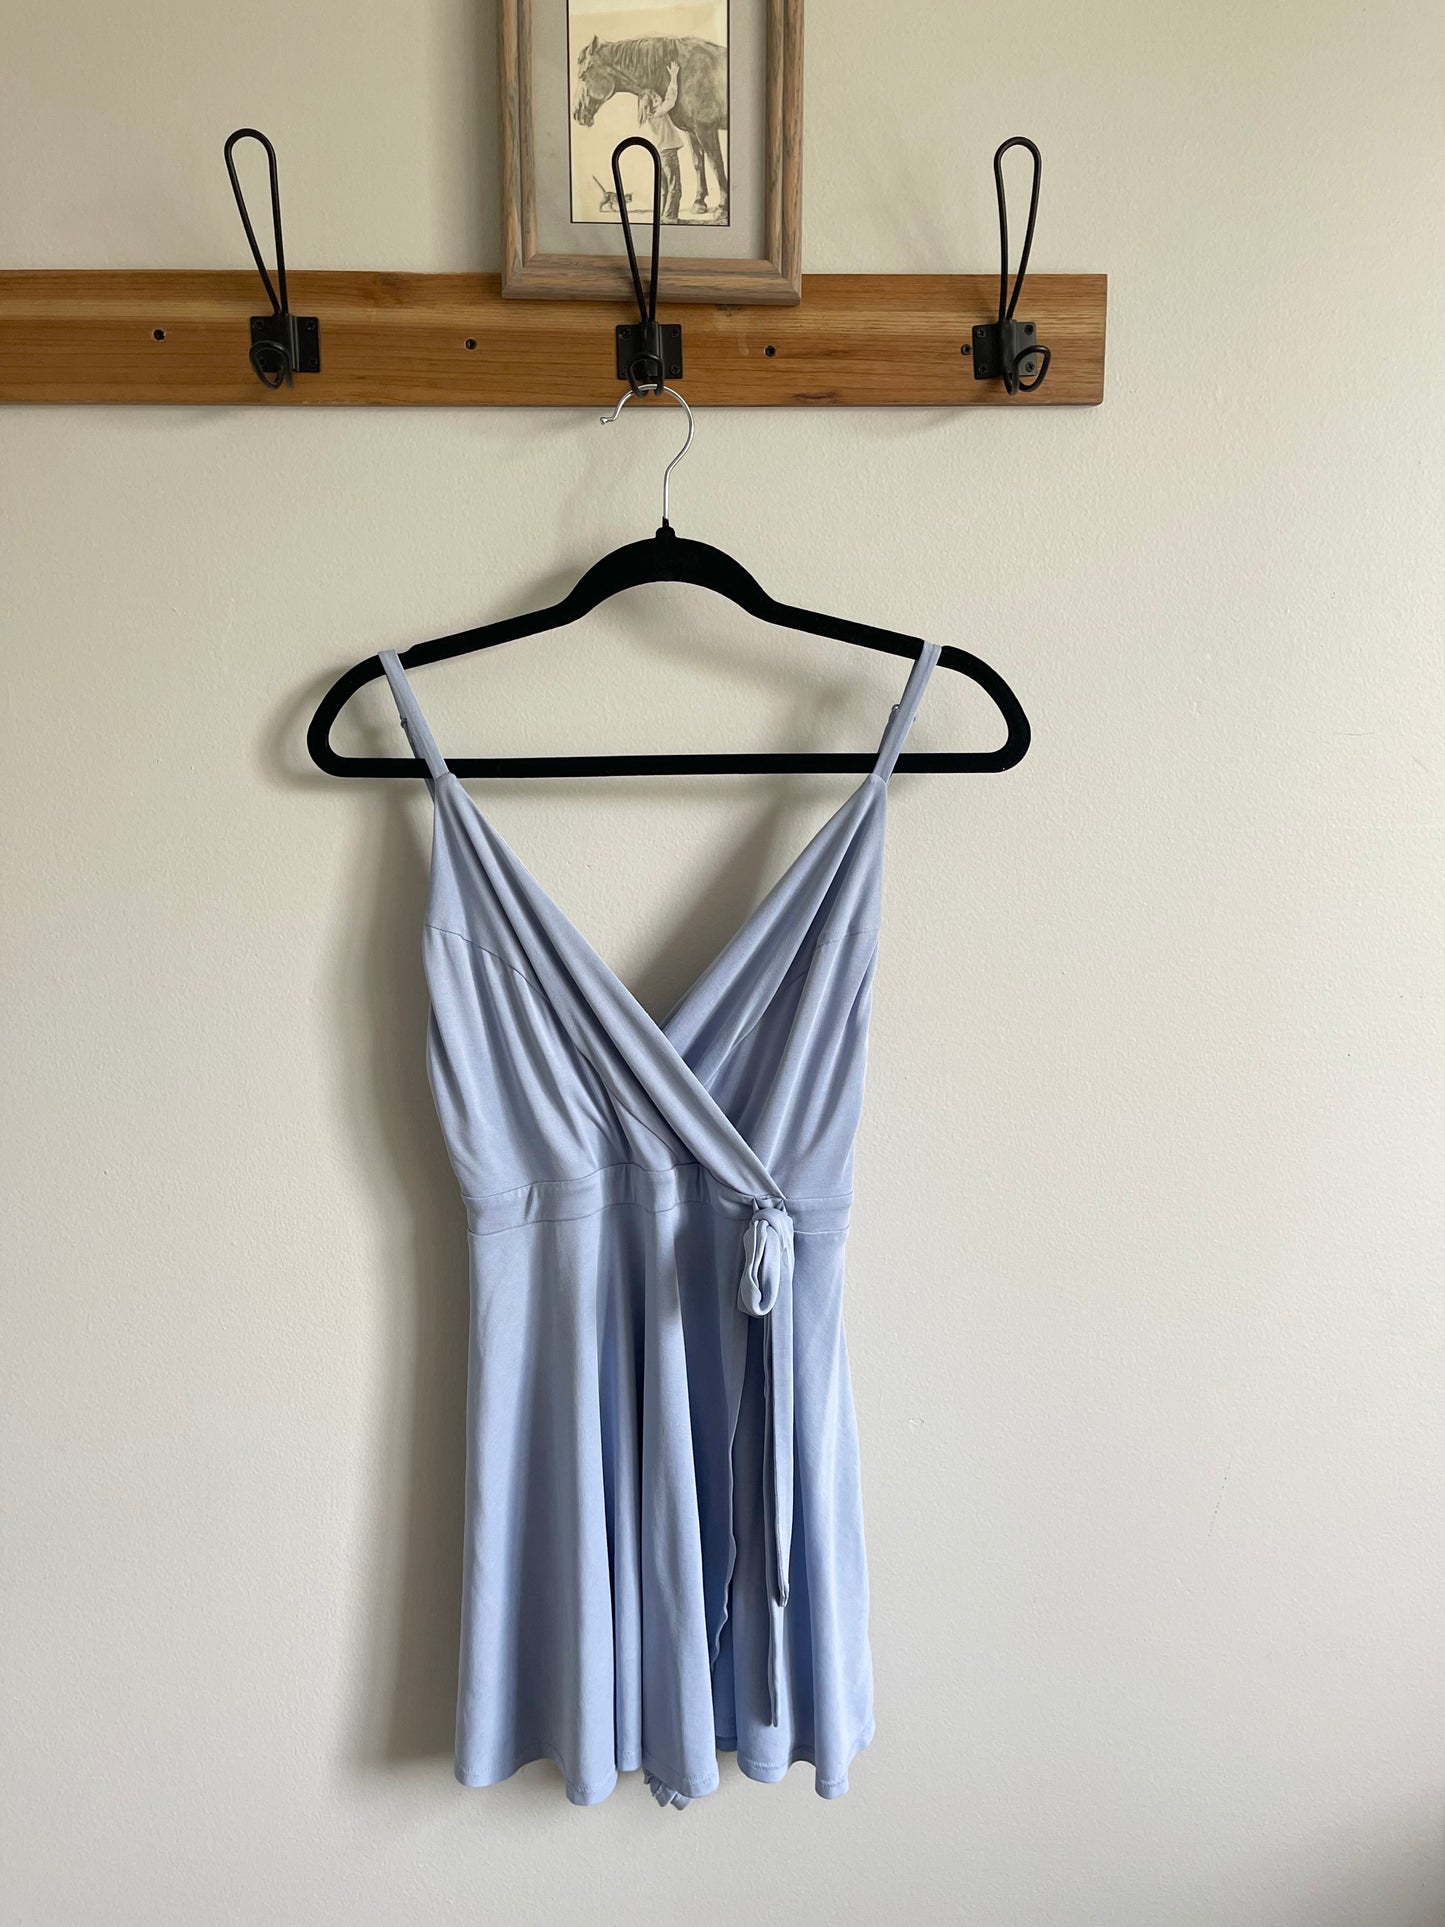 Perwinkle Urban Outfitters Romper